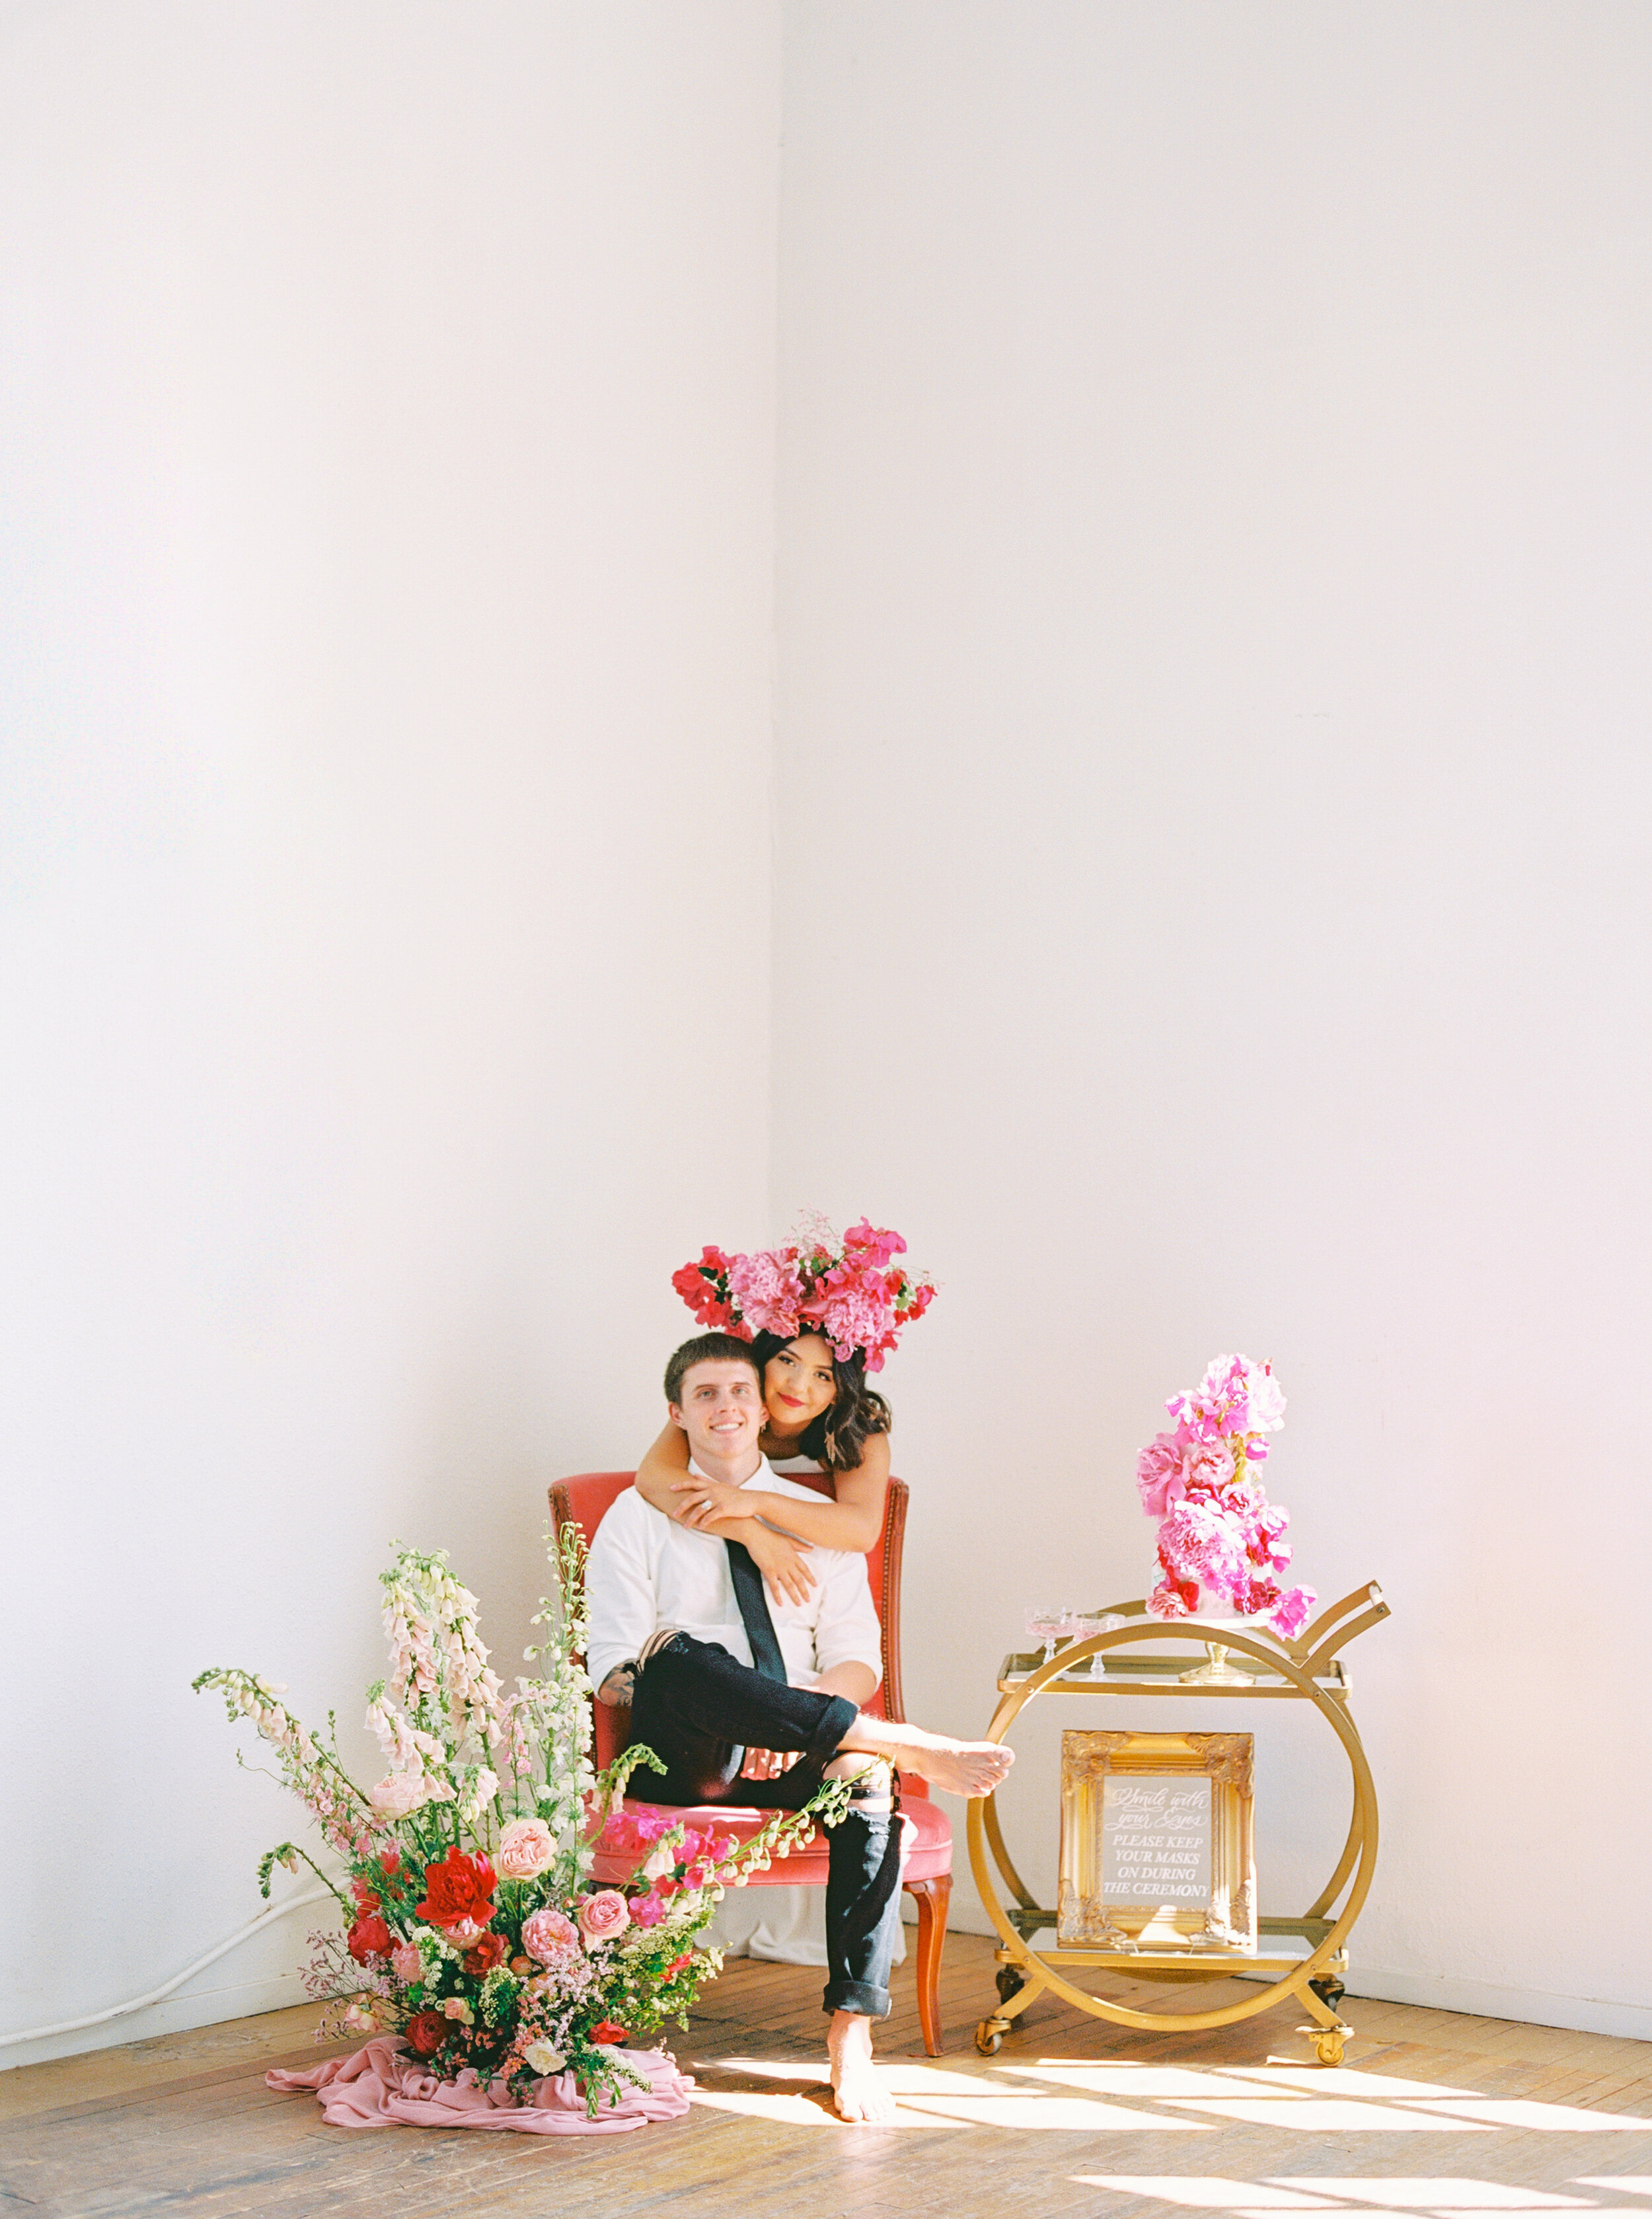 A Romantic Wedding Elopement Filled with Colorful Fuchsia - Sarahi Hadden Submission-50.jpg